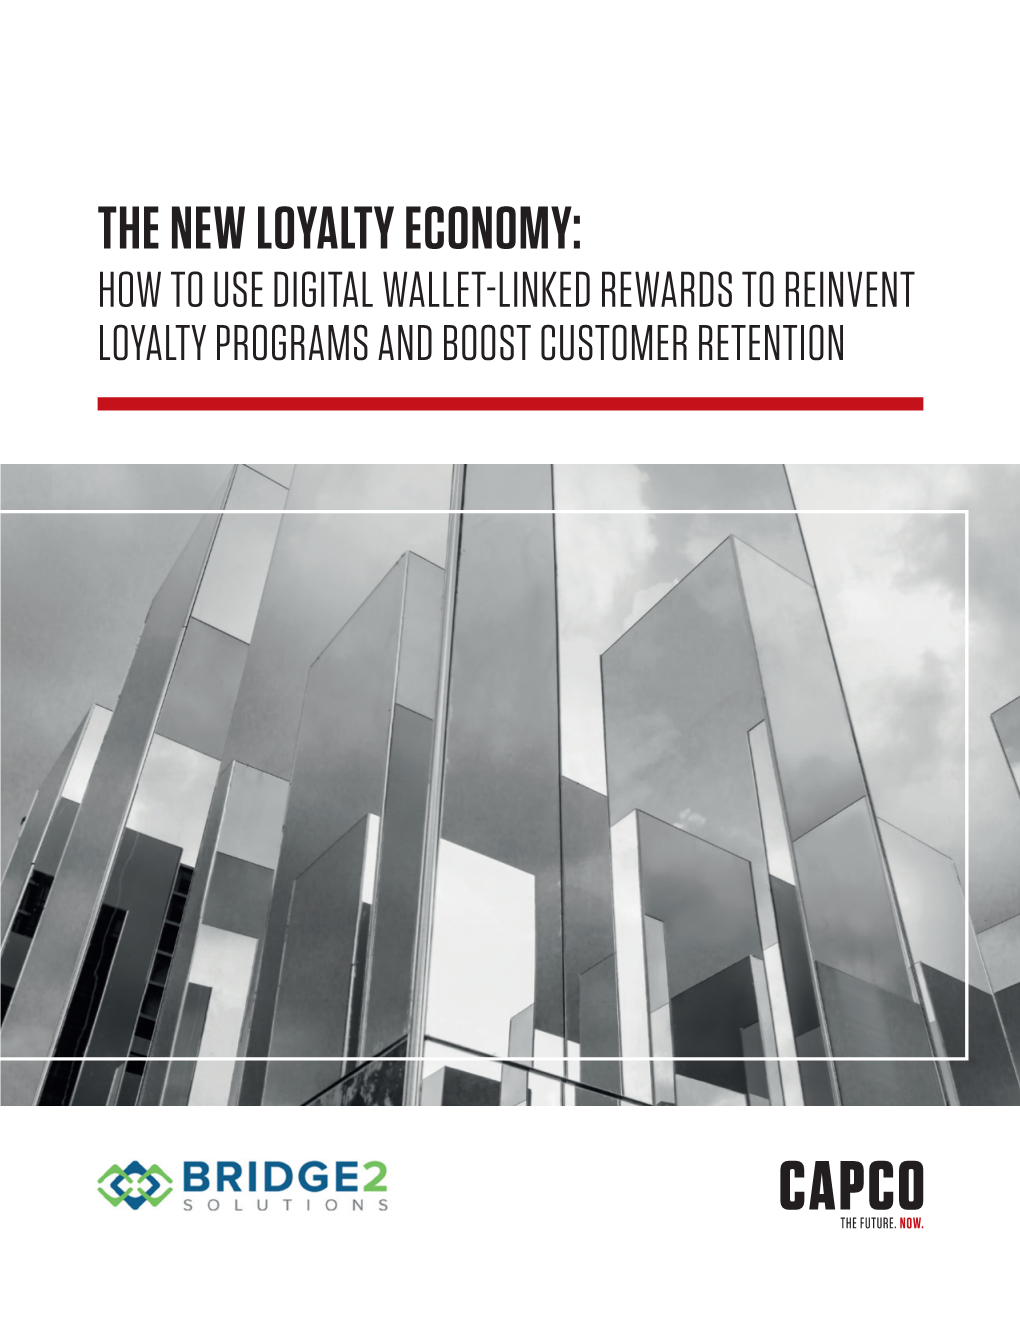 The New Loyalty Economy: How to Use Digital Wallet-Linked Rewards to Reinvent Loyalty Programs and Boost Customer Retention Intro